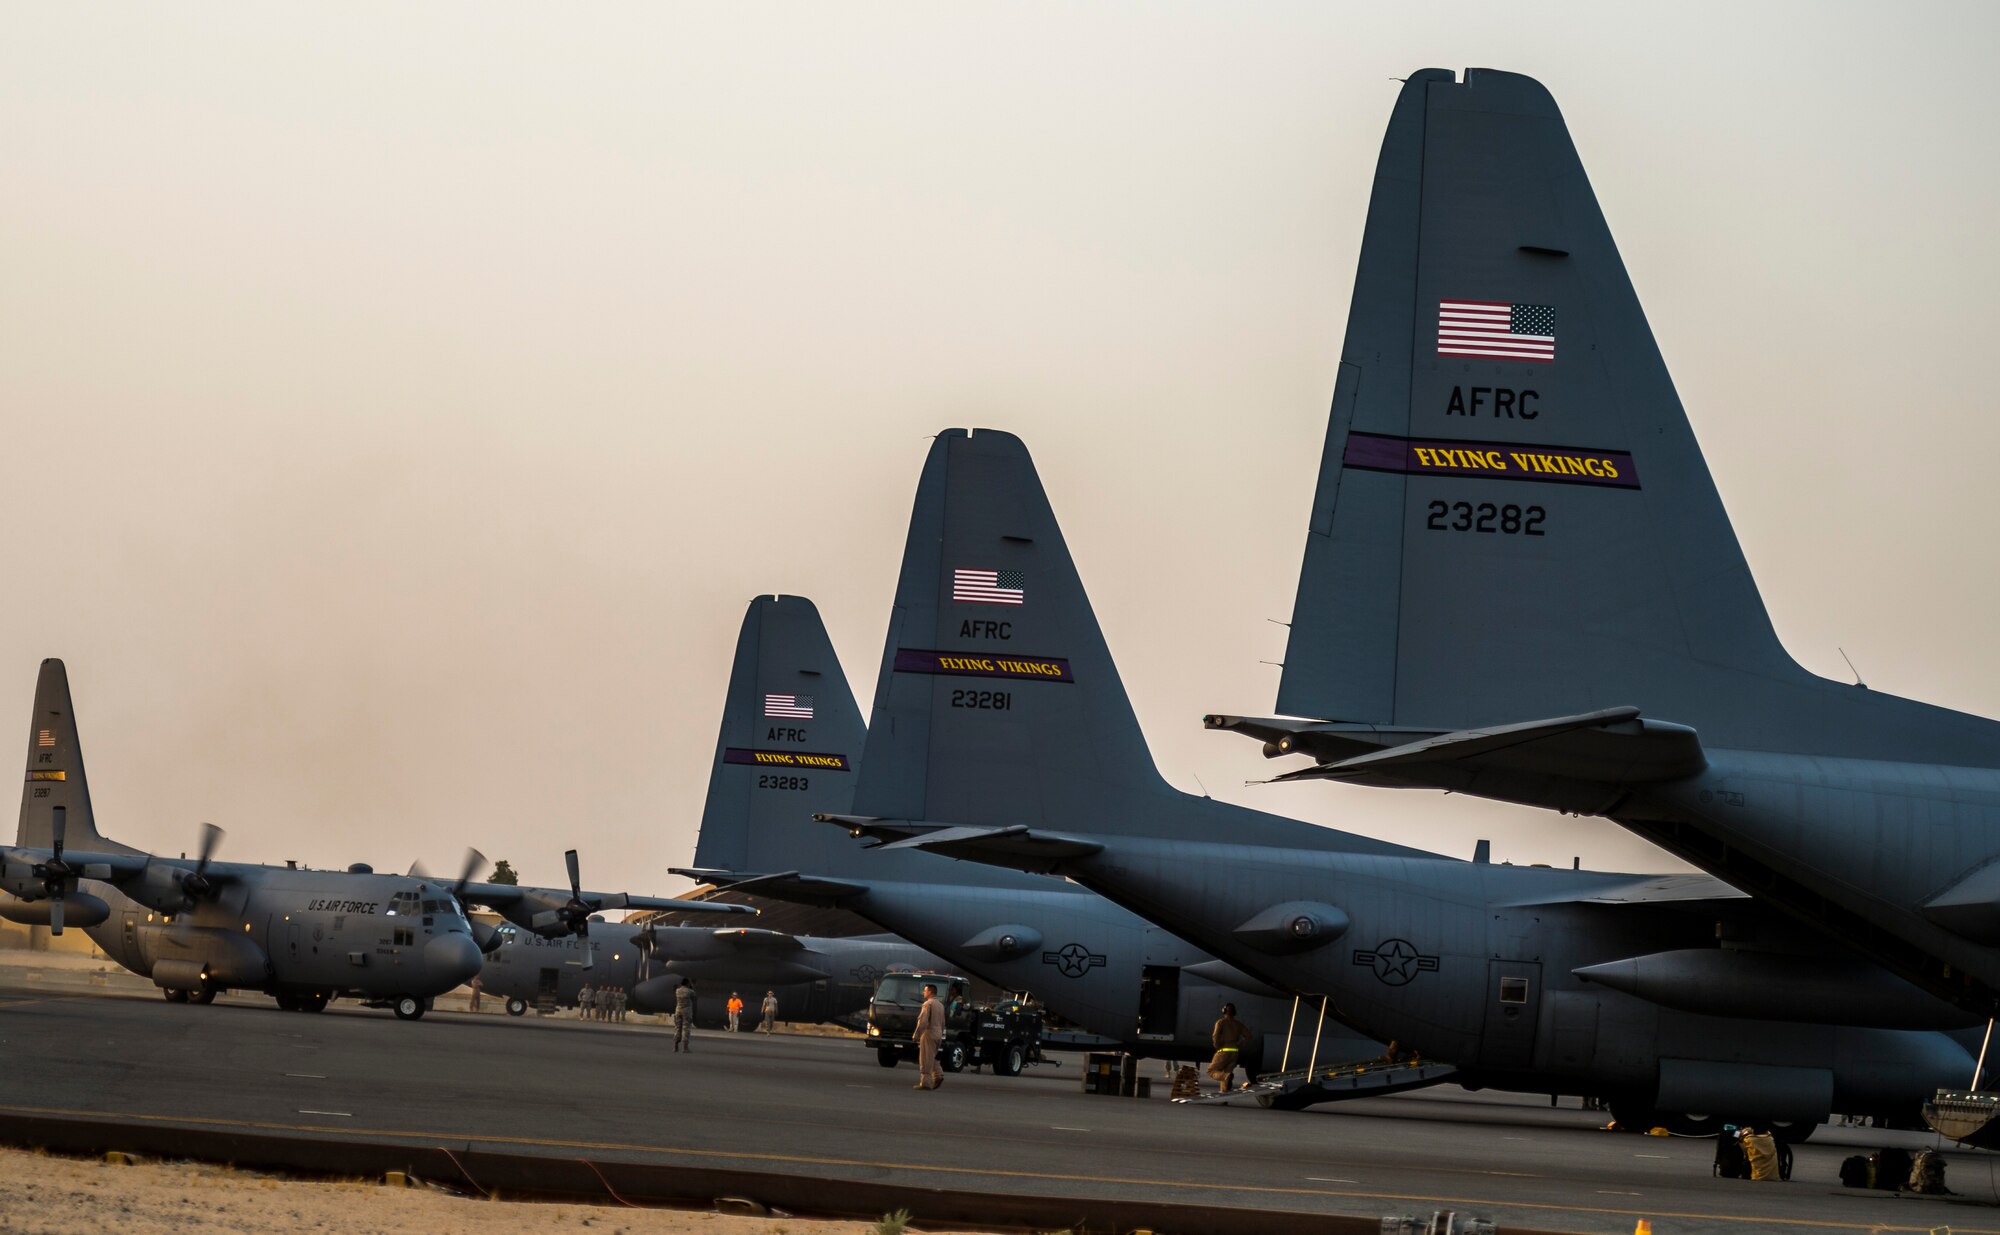 A C-130H Hercules from the 934th Air Wing taxis after landing at its new home Sept. 12, 2014 at an undisclosed location in Southwest Asia. The crew will be stationed with the 386th Air Expeditionary Wing for the next four months and deployed from Minneapolis-St Paul Air Reserve Station, Minn. in support of Operation Enduring Freedom. (U.S. Air Force photo by Staff Sgt. Jeremy Bowcock)